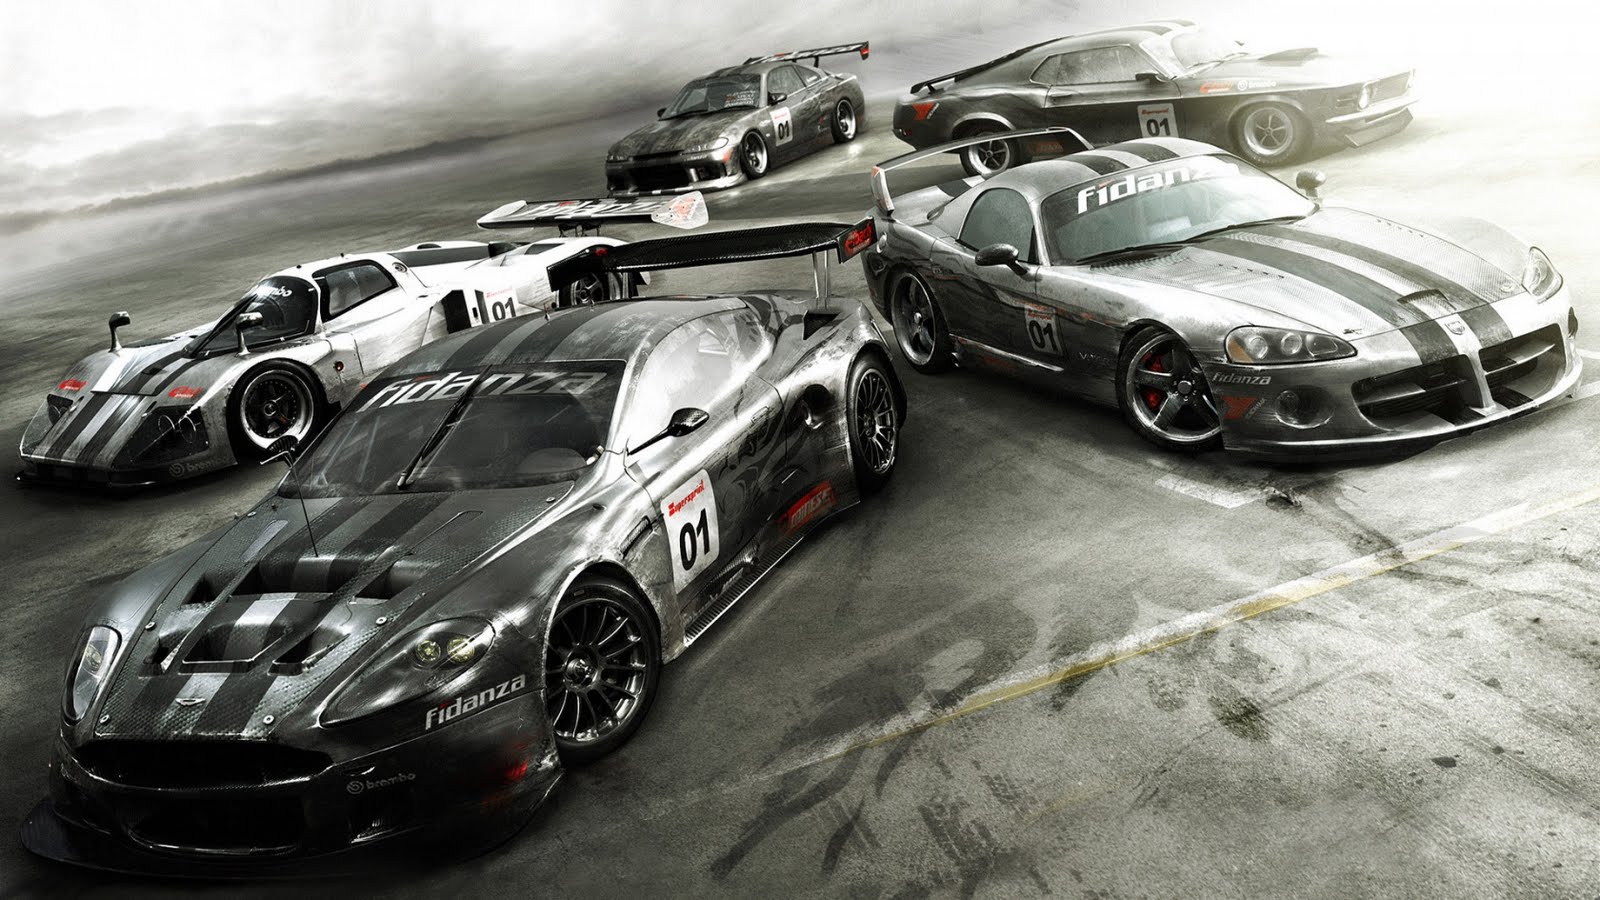 Hot Cars Wallpapers Cars Pictures Wallpaper Cars Pictures